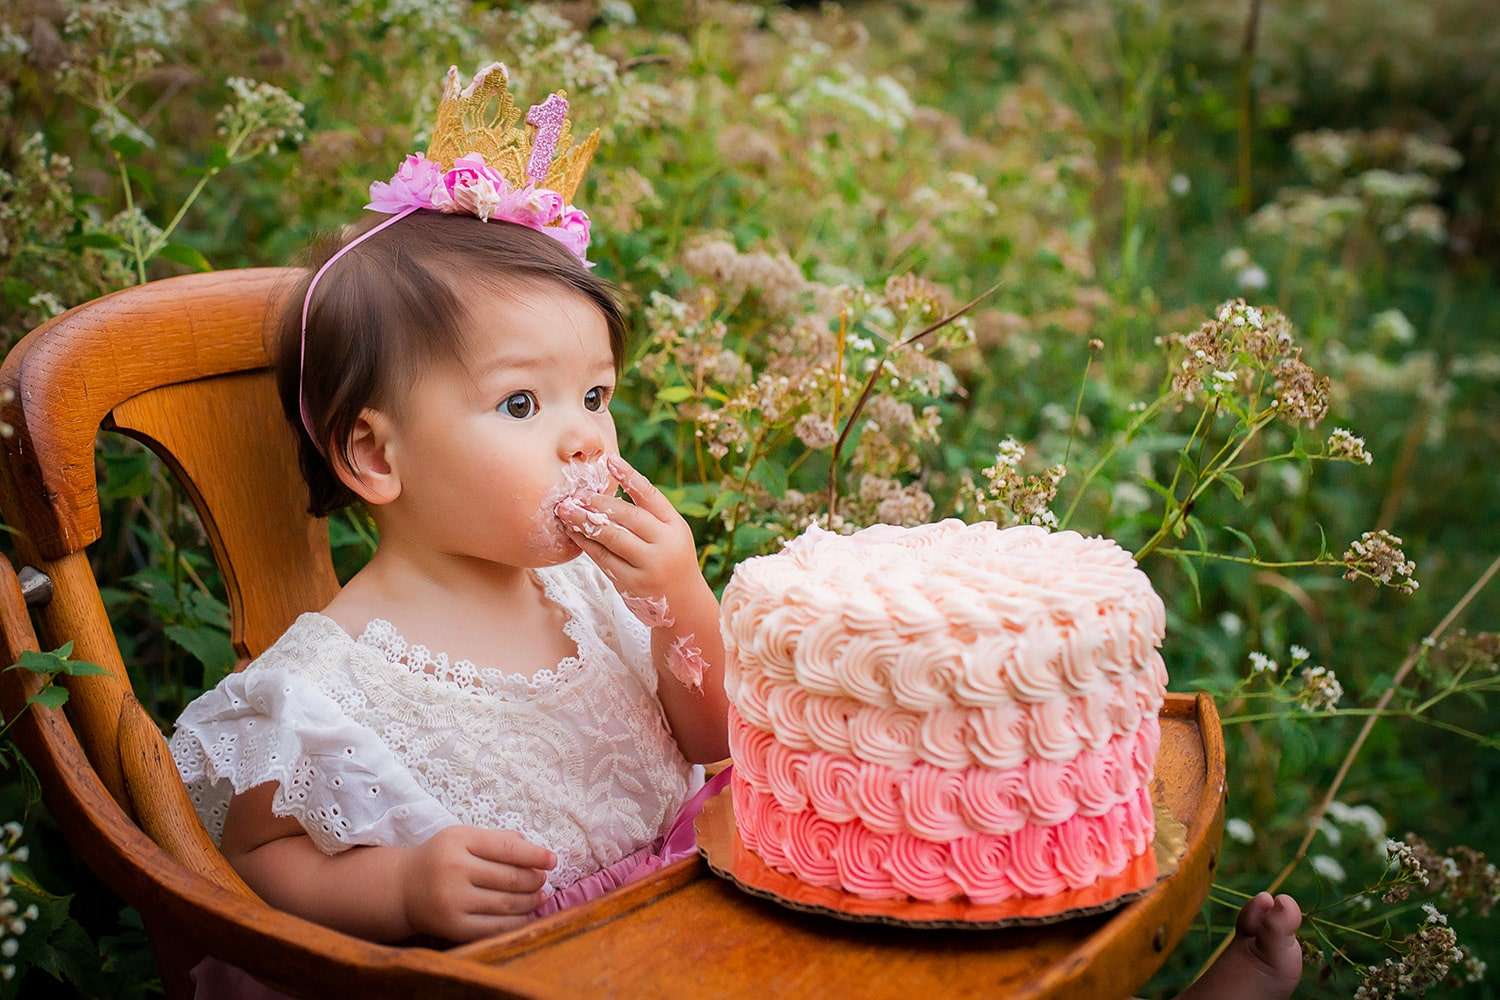 baby photographer in rochester ny captures baby girl celebrating first birthday with a cake smash